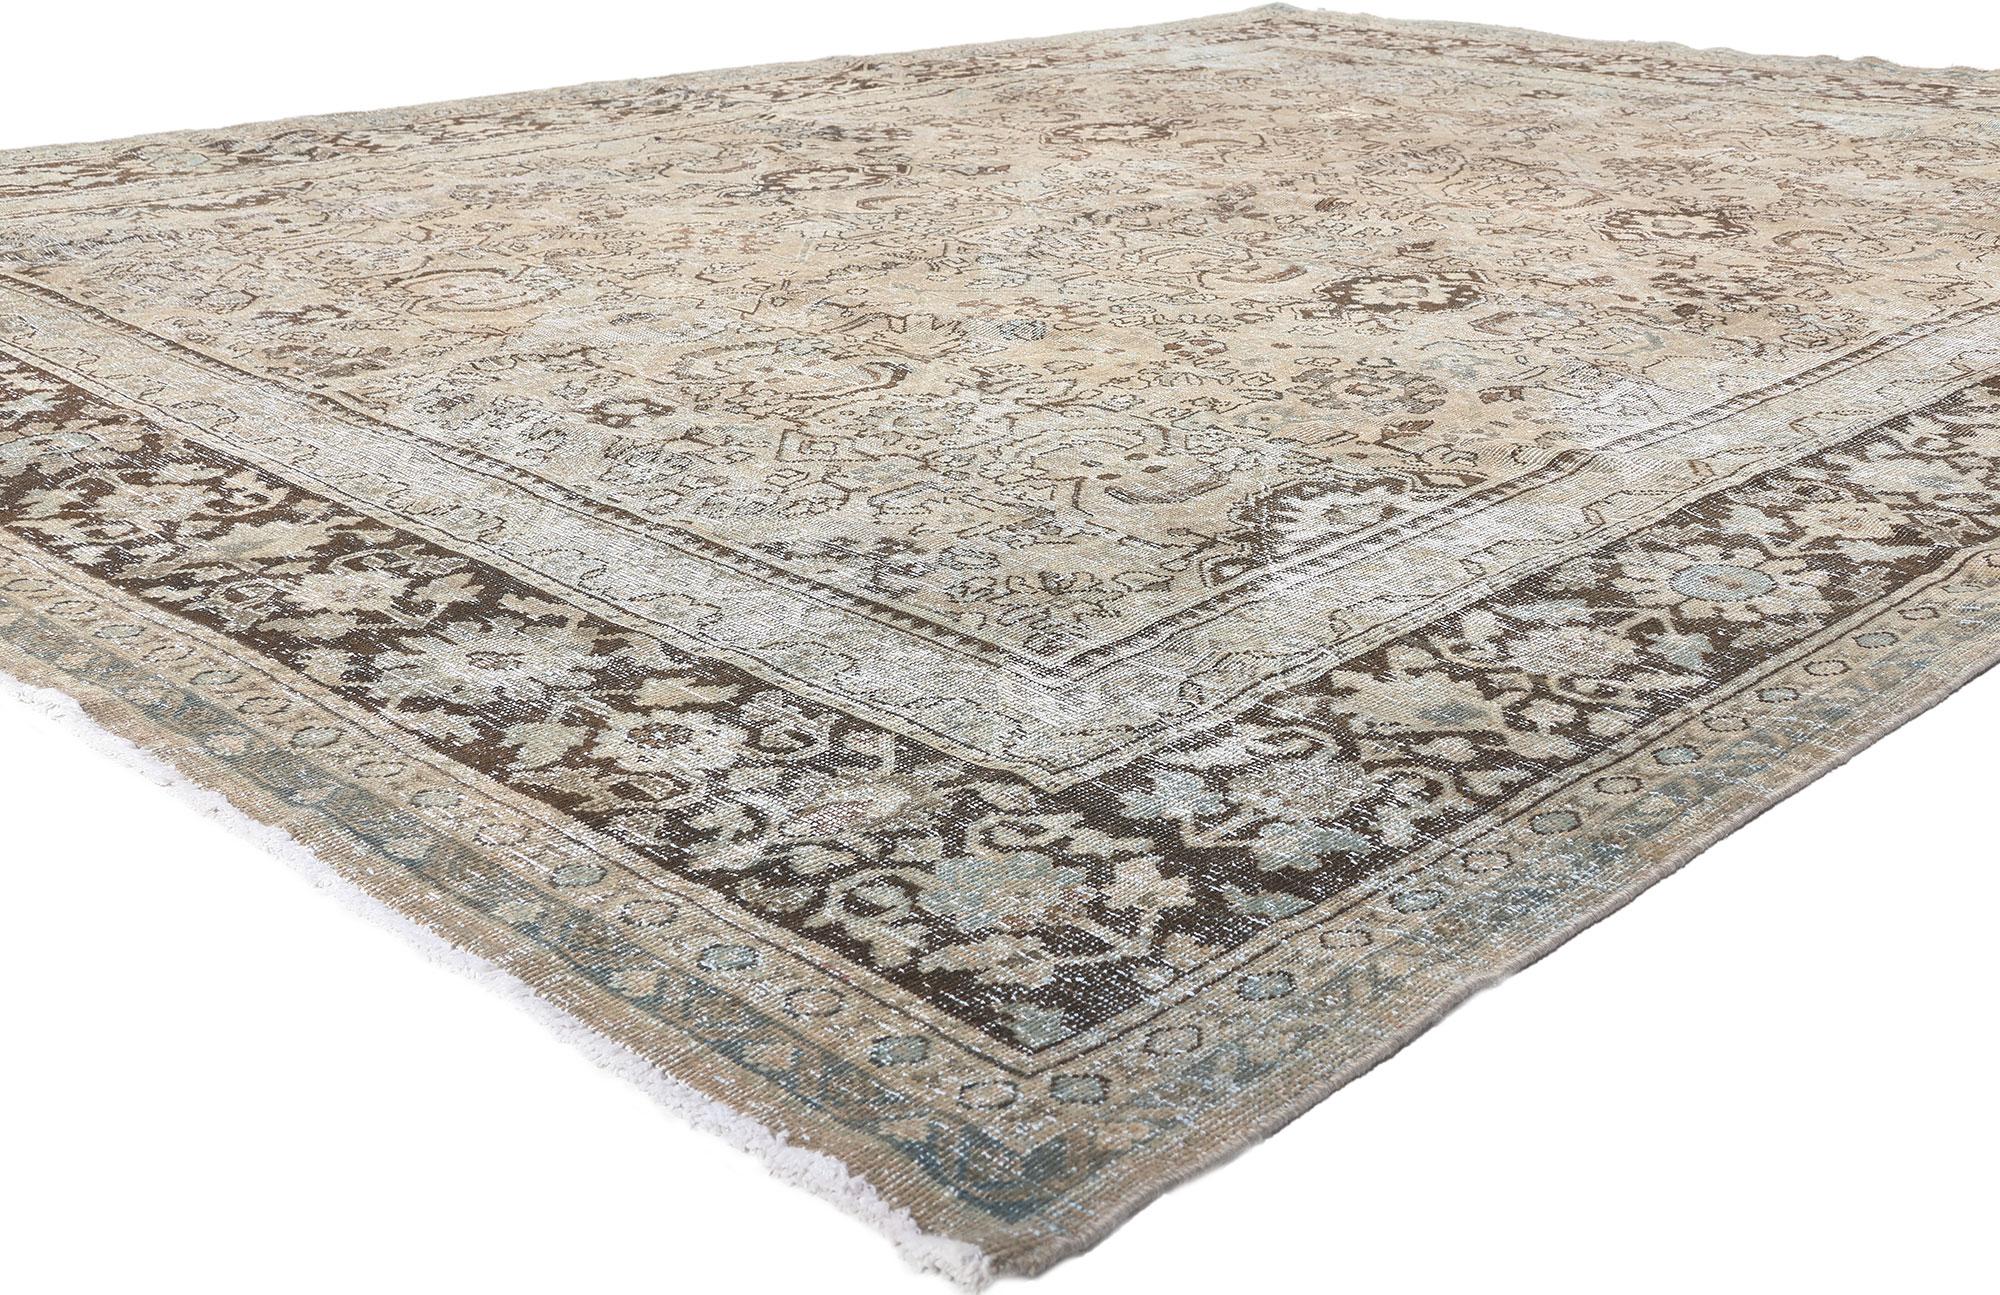 61278 Distressed Antique-Worn Persian Mahal Rug, 09'04 x 12'06.
Rustic and refined meets laid-back luxury in this hand knotted wool distressed antique Persian Mahal rug. The faded Herati design combined with  neutral, muted colors yields a unique